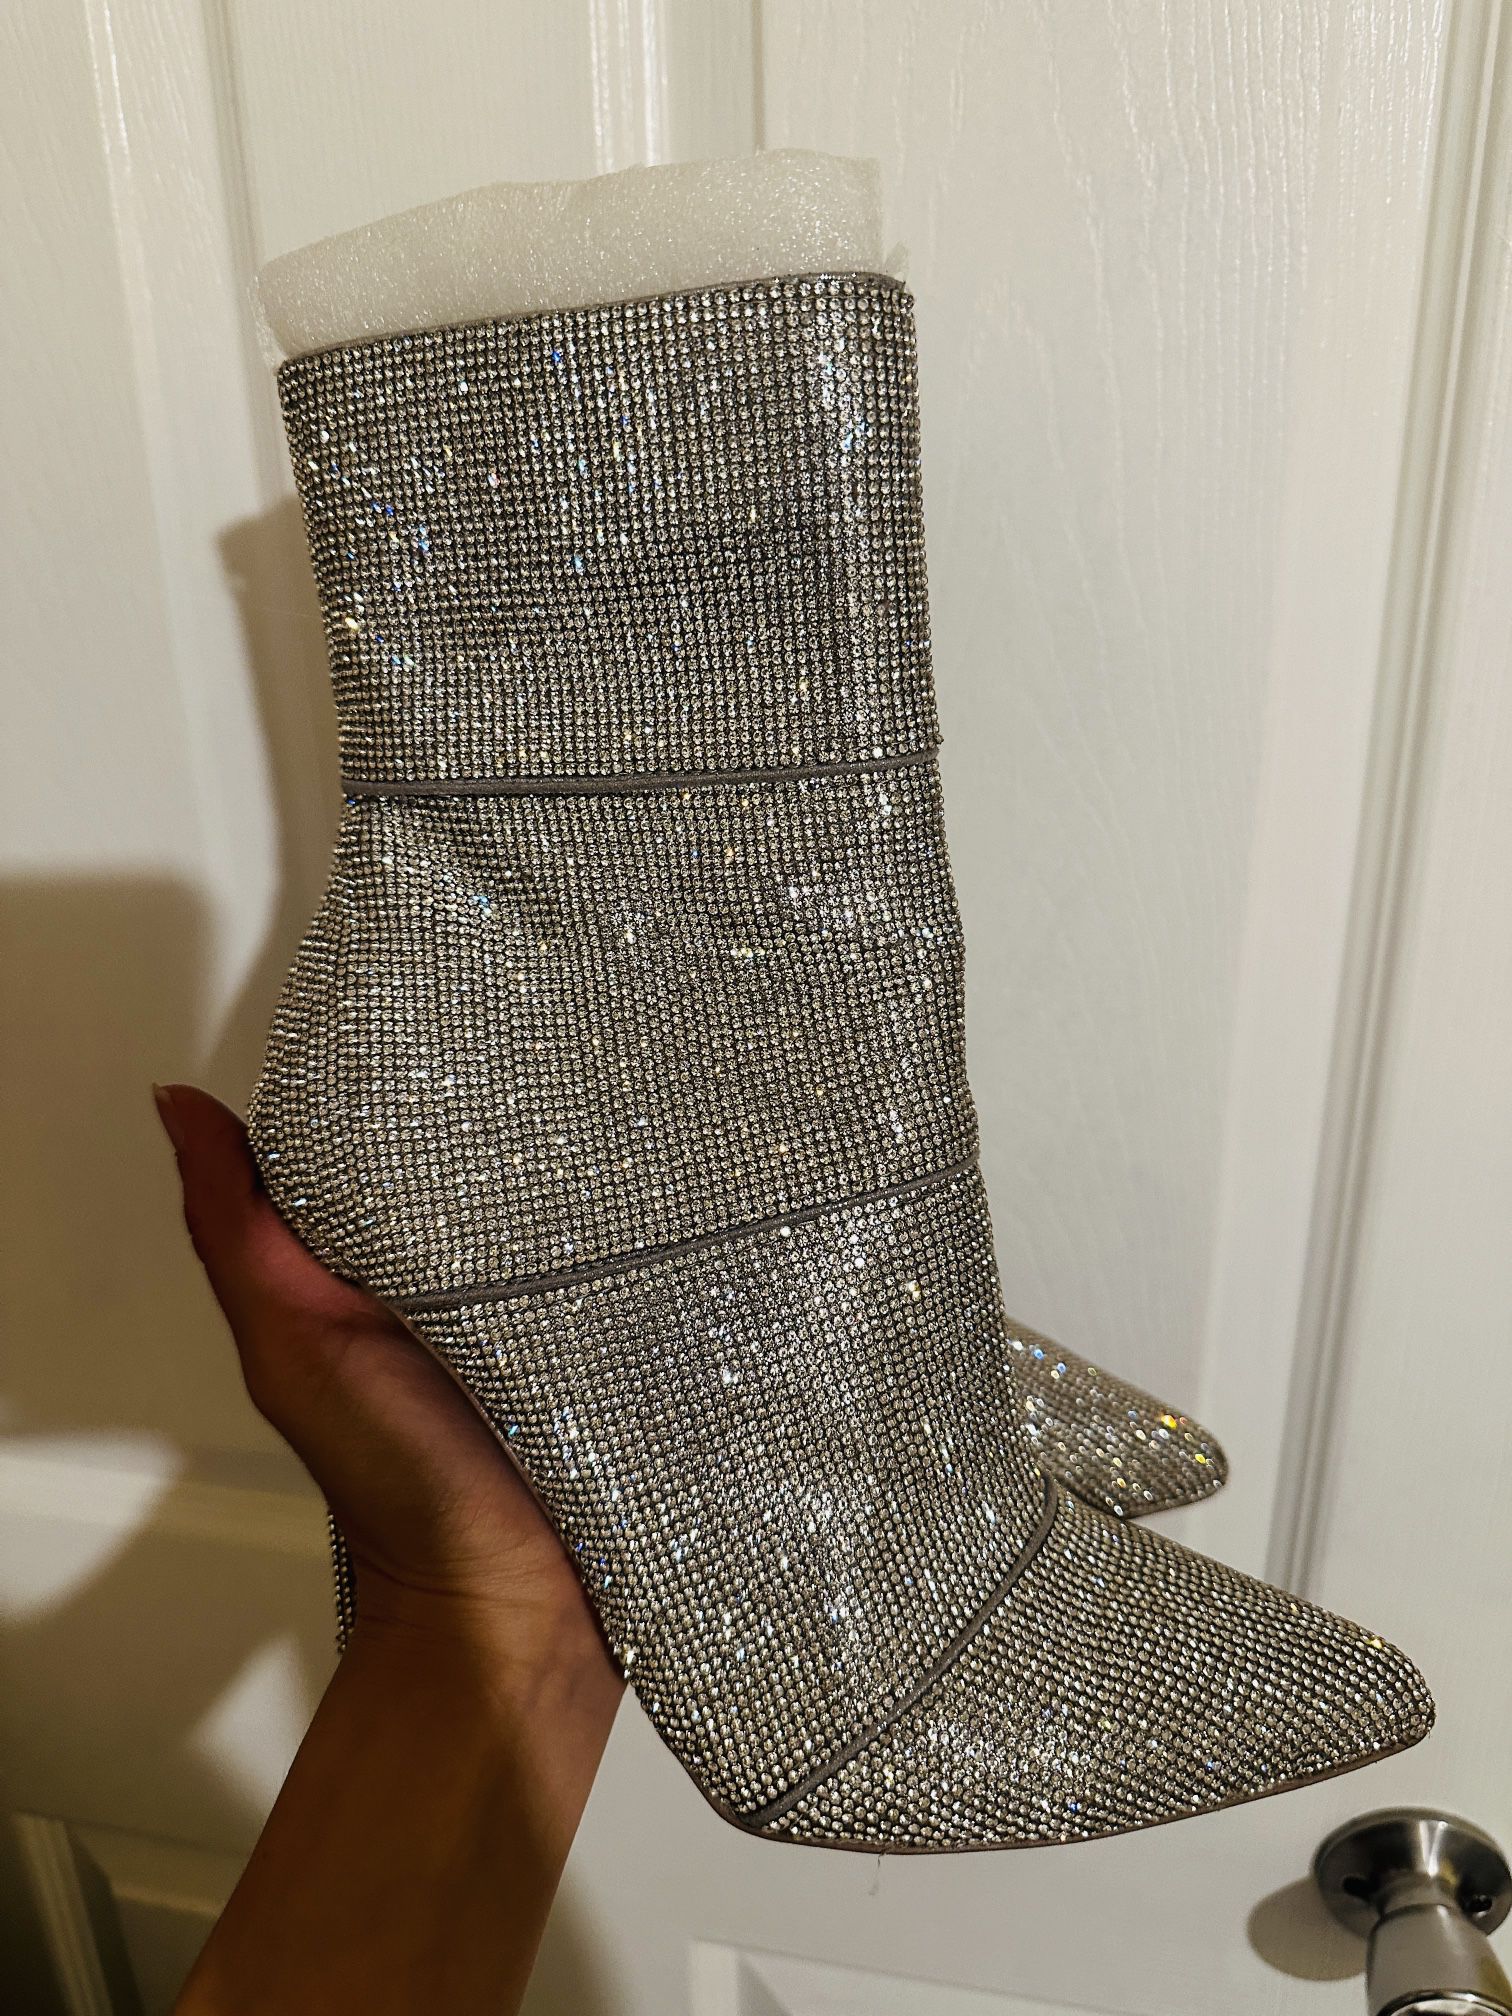 Steve Madden Heeled Boots Sparkly